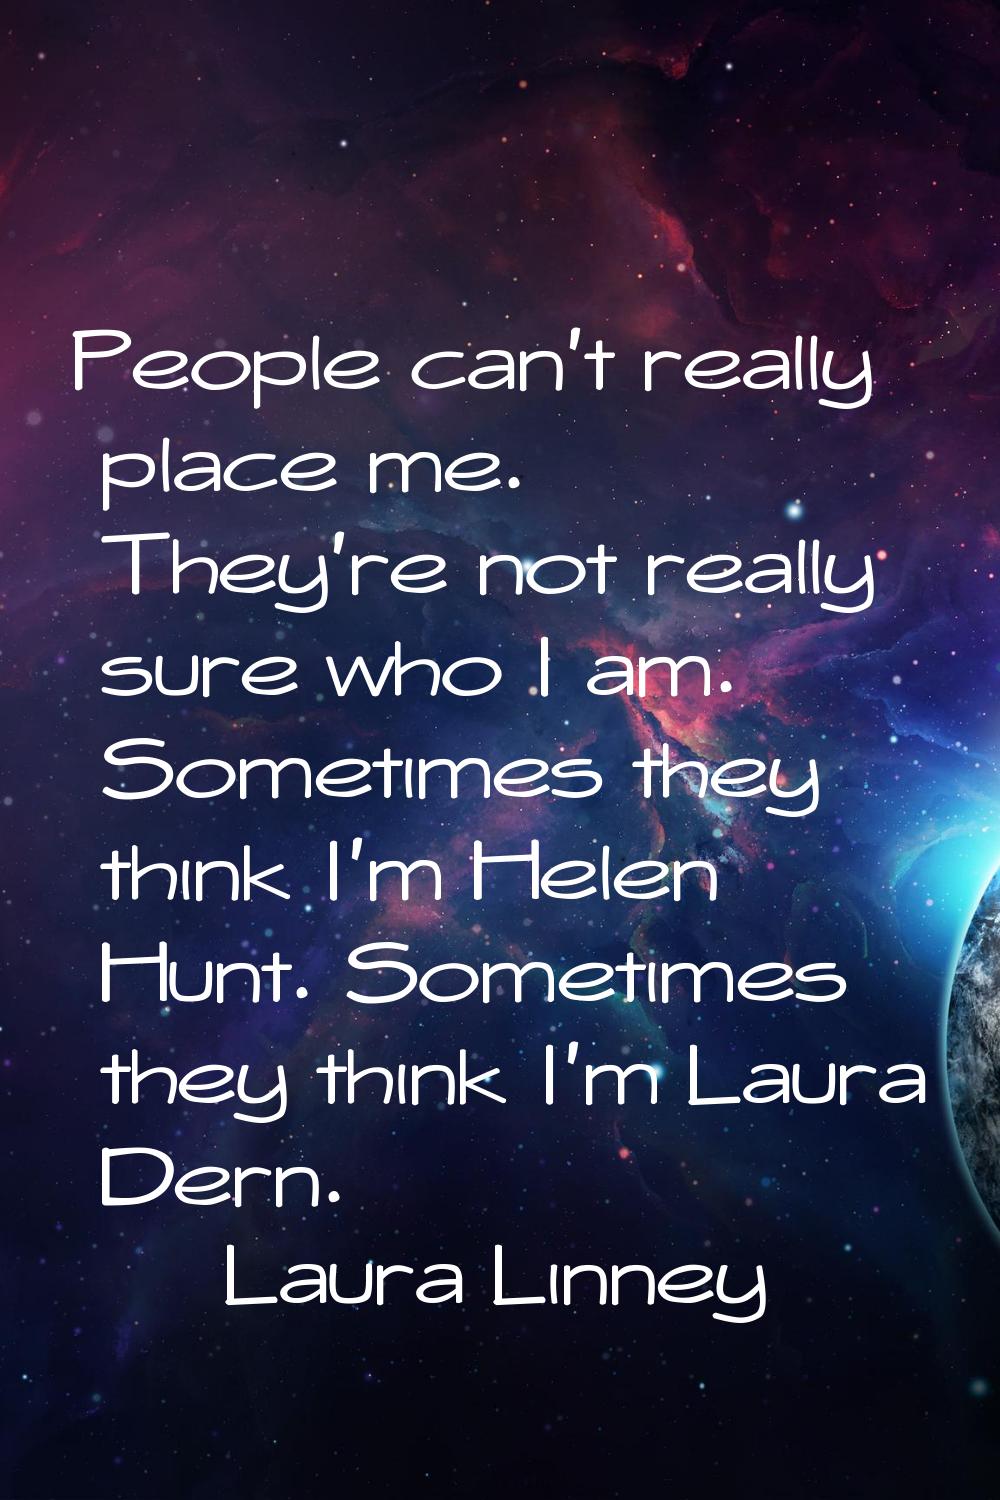 People can't really place me. They're not really sure who I am. Sometimes they think I'm Helen Hunt